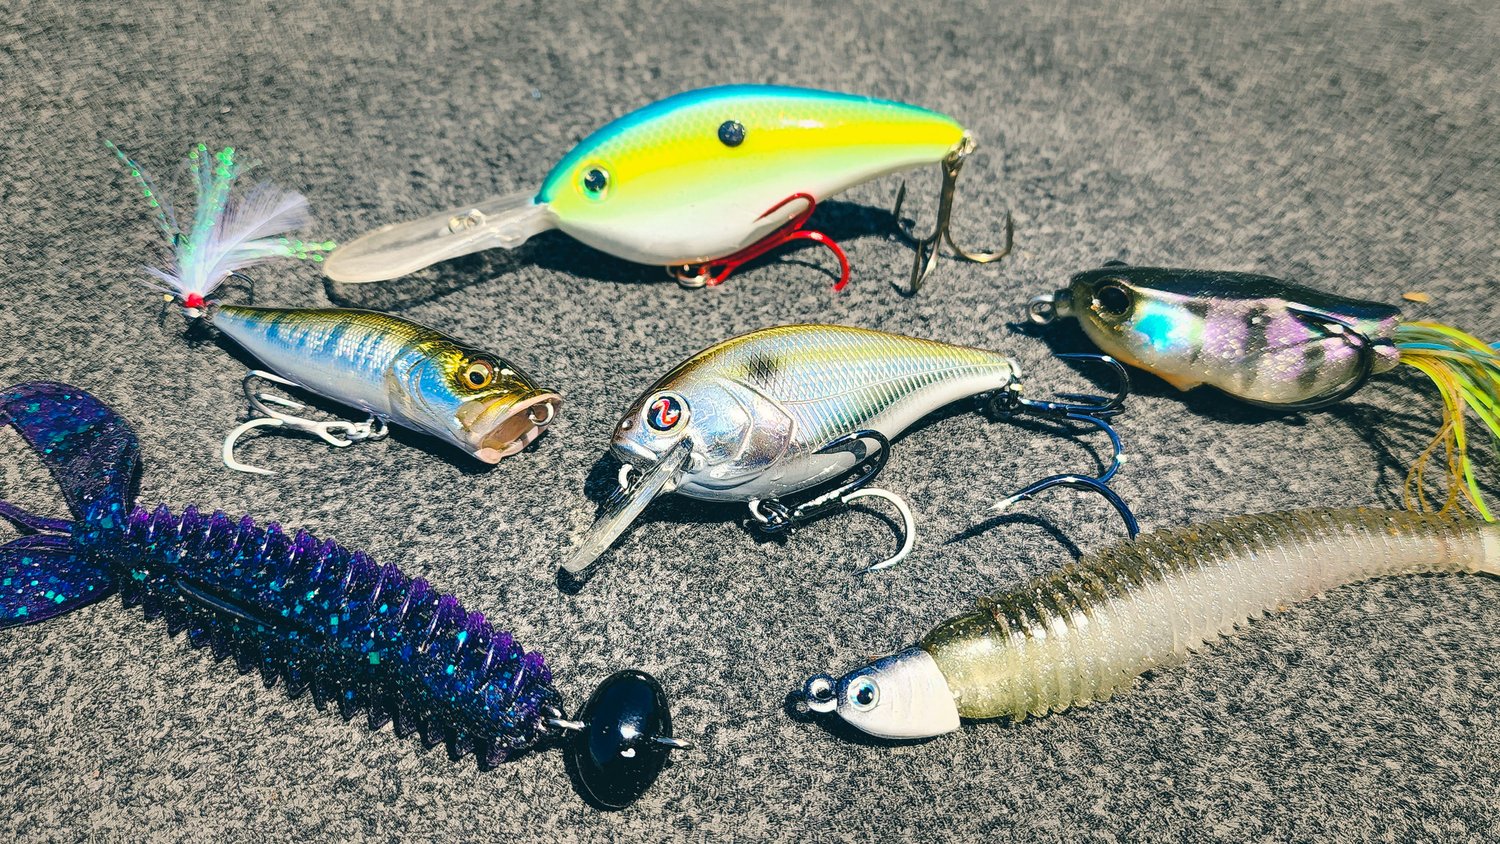 Top Baits For Post Spawn Bass Fishing! — Tactical Bassin' - Bass